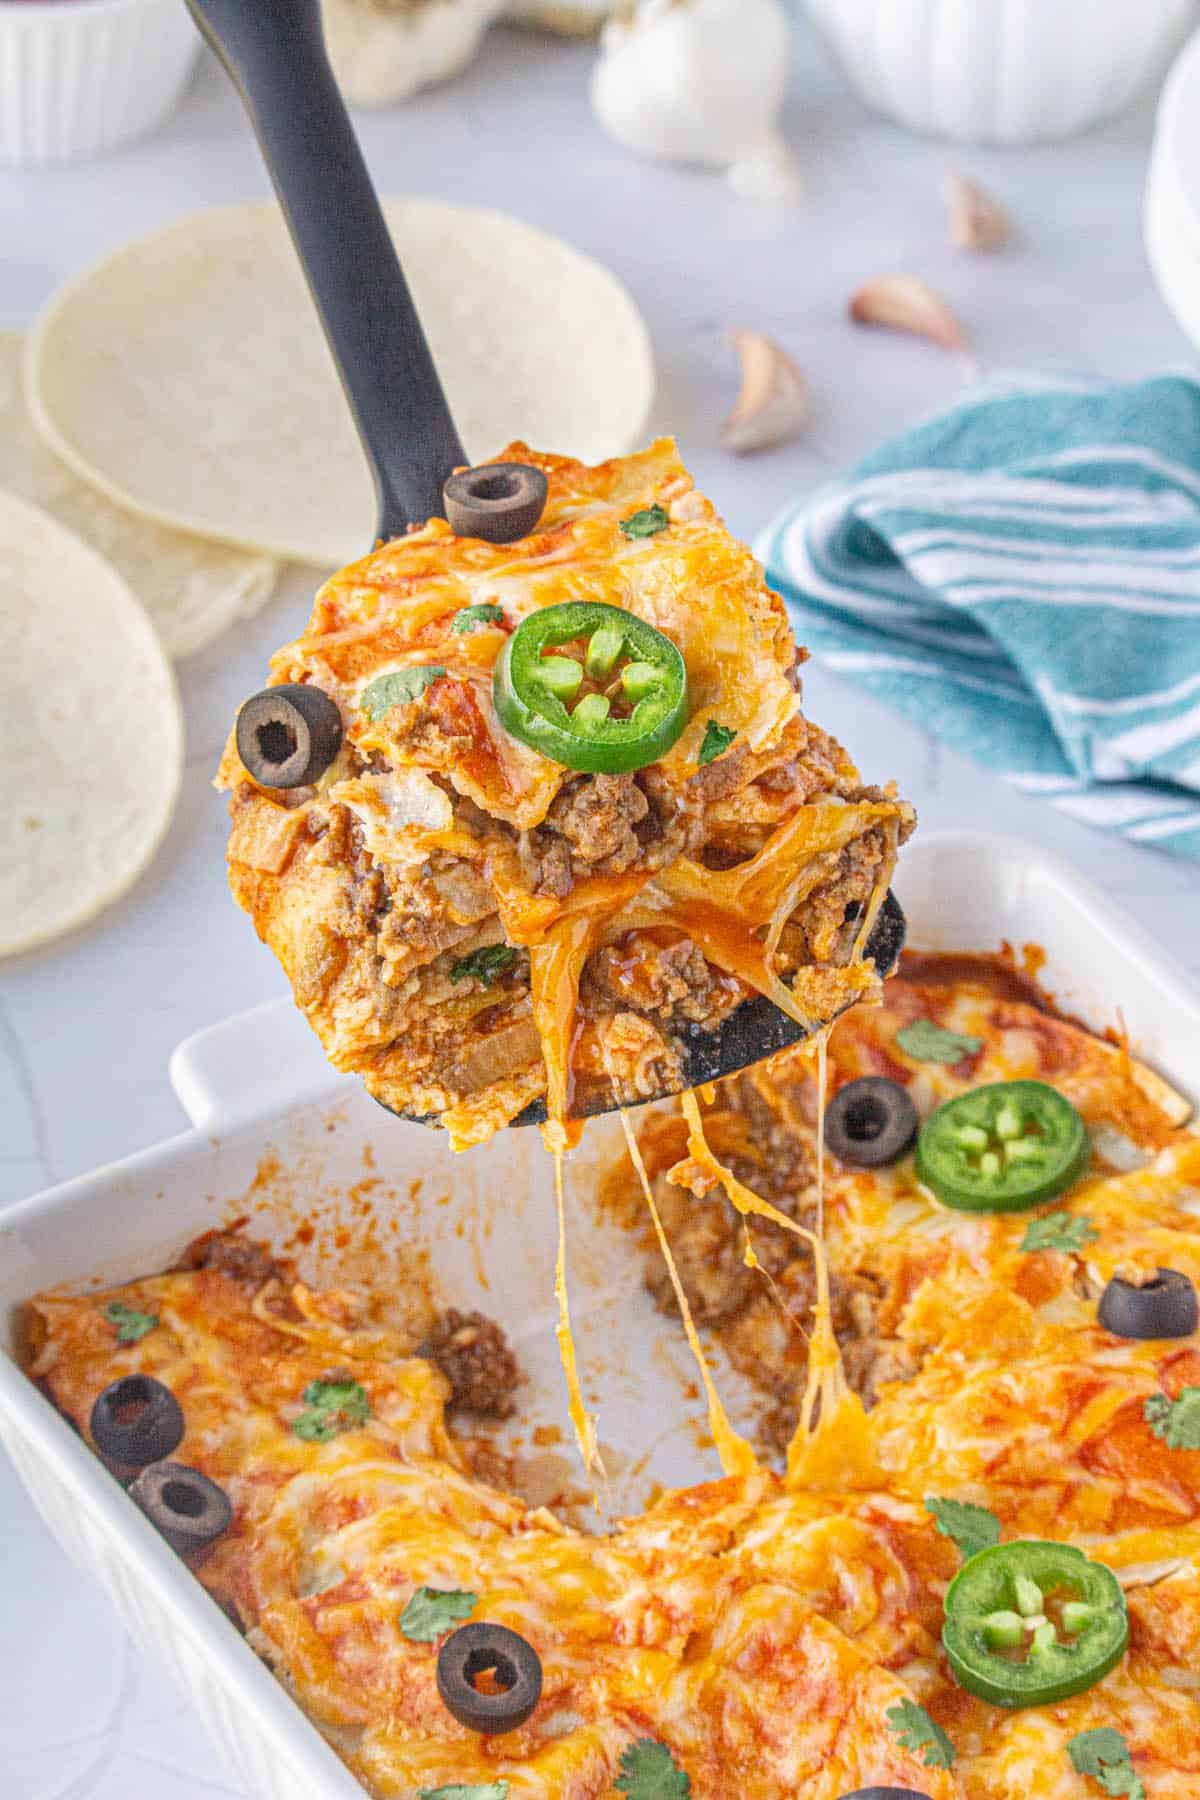 A spatula dishing up a serving of ground beef enchilada casserole.